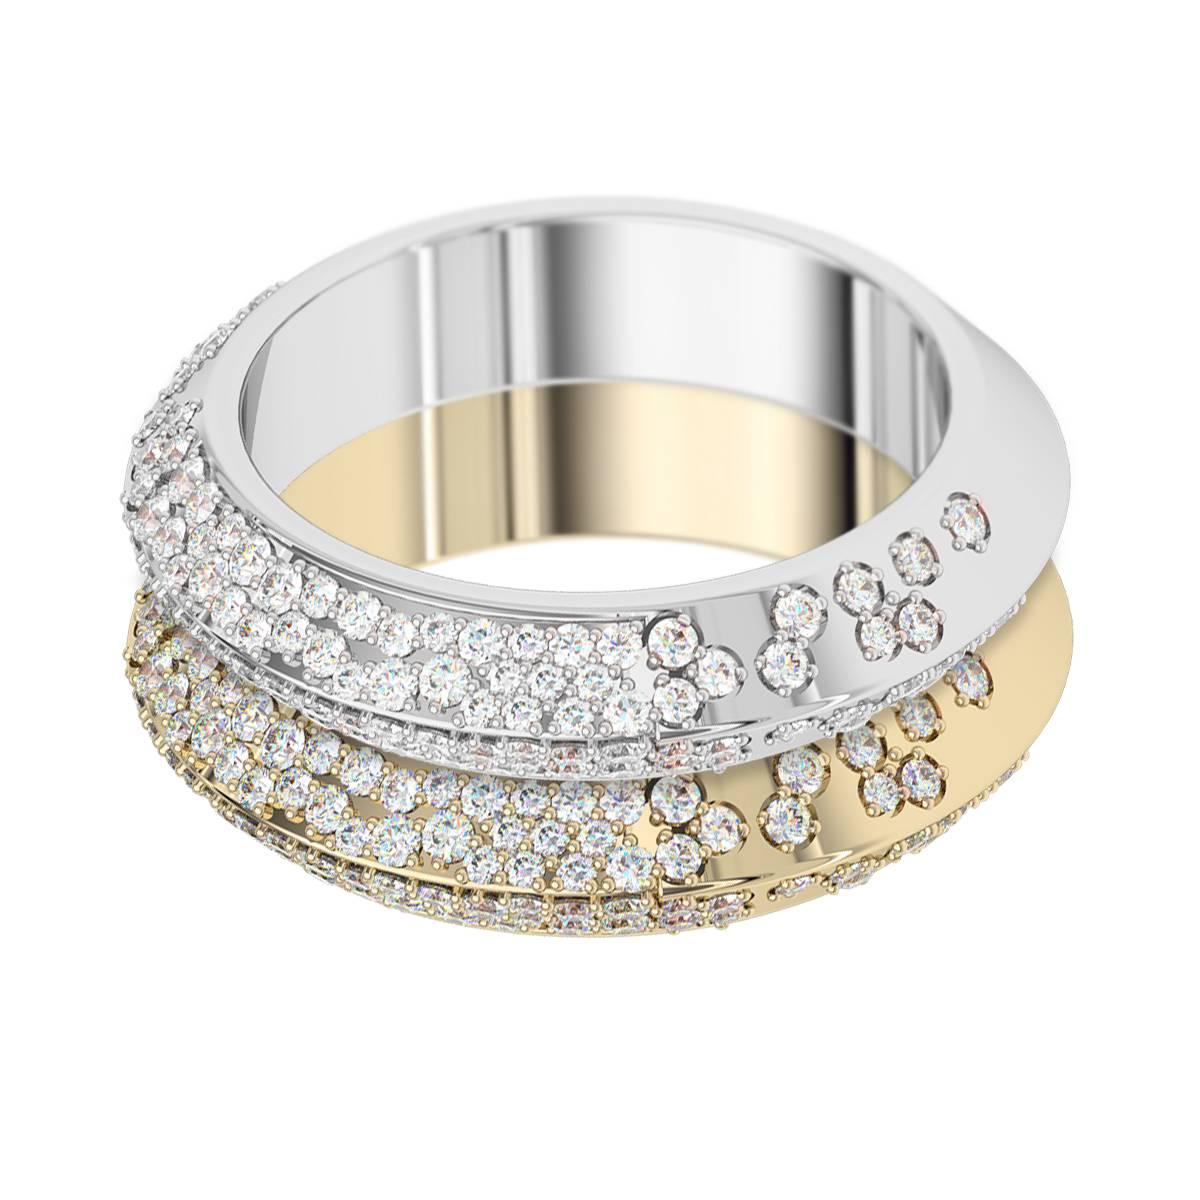 This elegant diamond pave eternity ring is handcrafted to order in Sydney in 18 karat yellow and white gold, and set with 1.6 carats of top quality diamonds. The knife edge design of the double band is contemporary and timeless. This beautiful ring